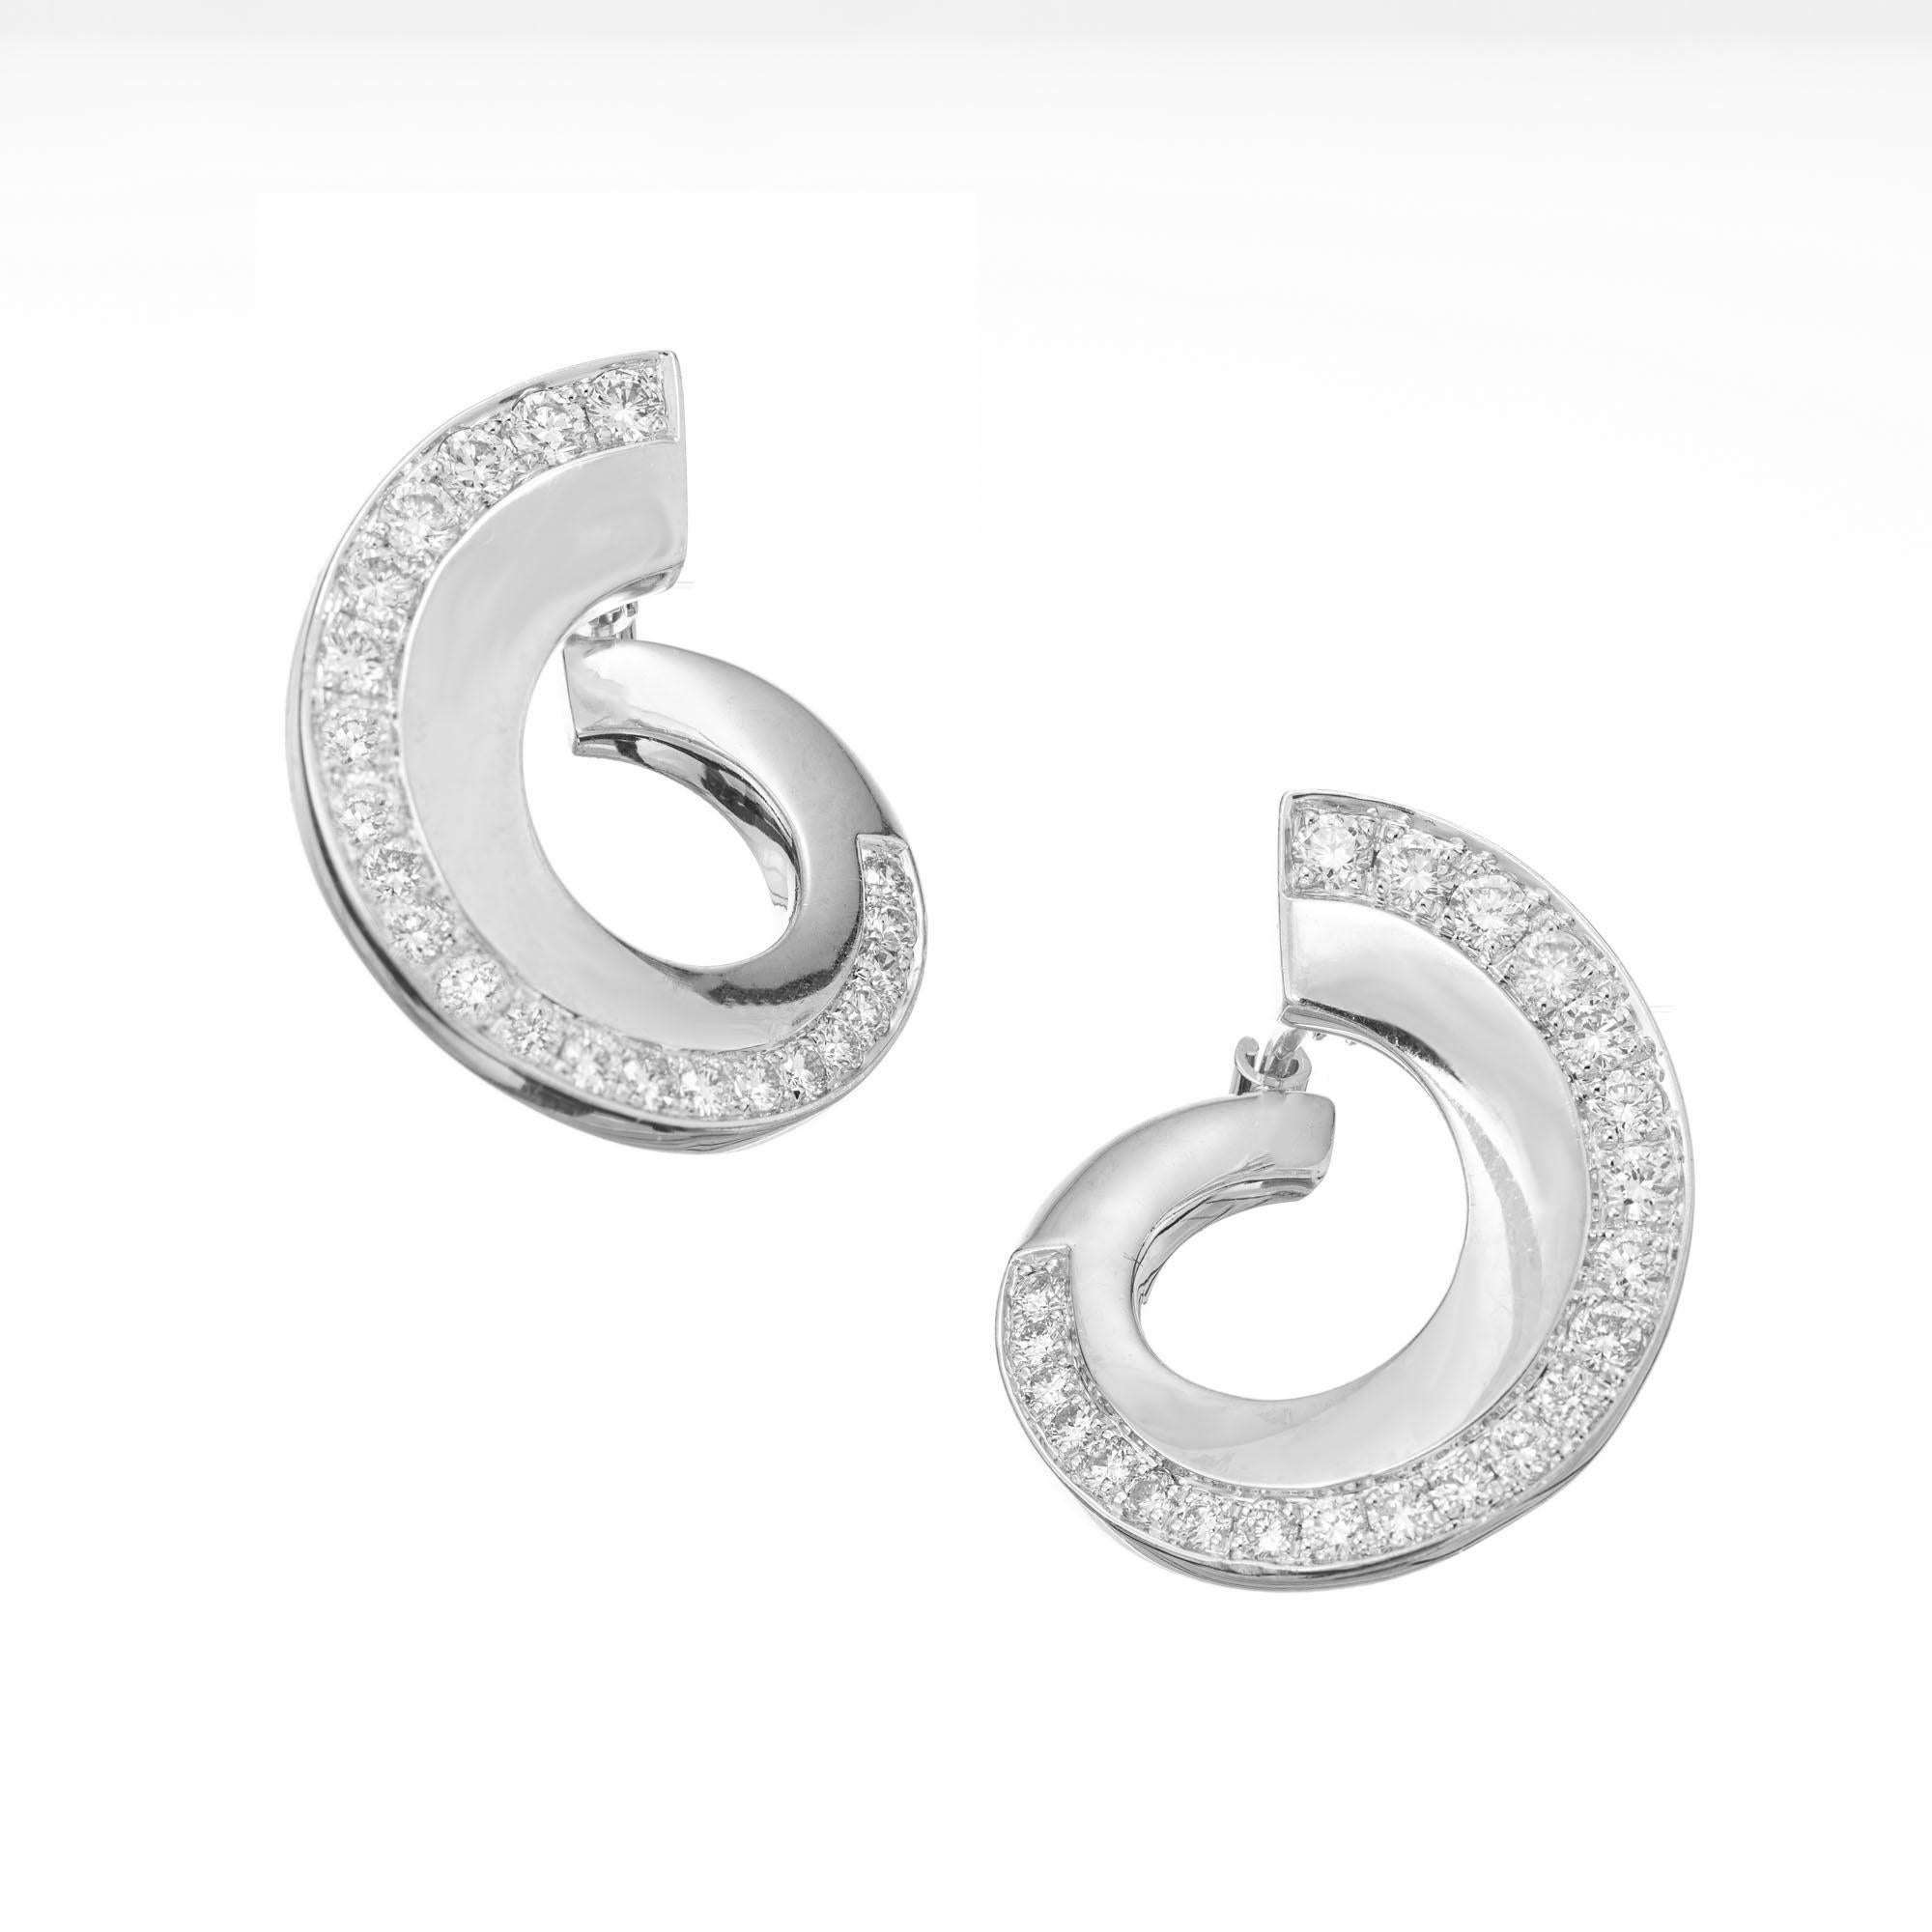 .75 Carat Diamond White Gold Swirl Earrings In Good Condition For Sale In Stamford, CT